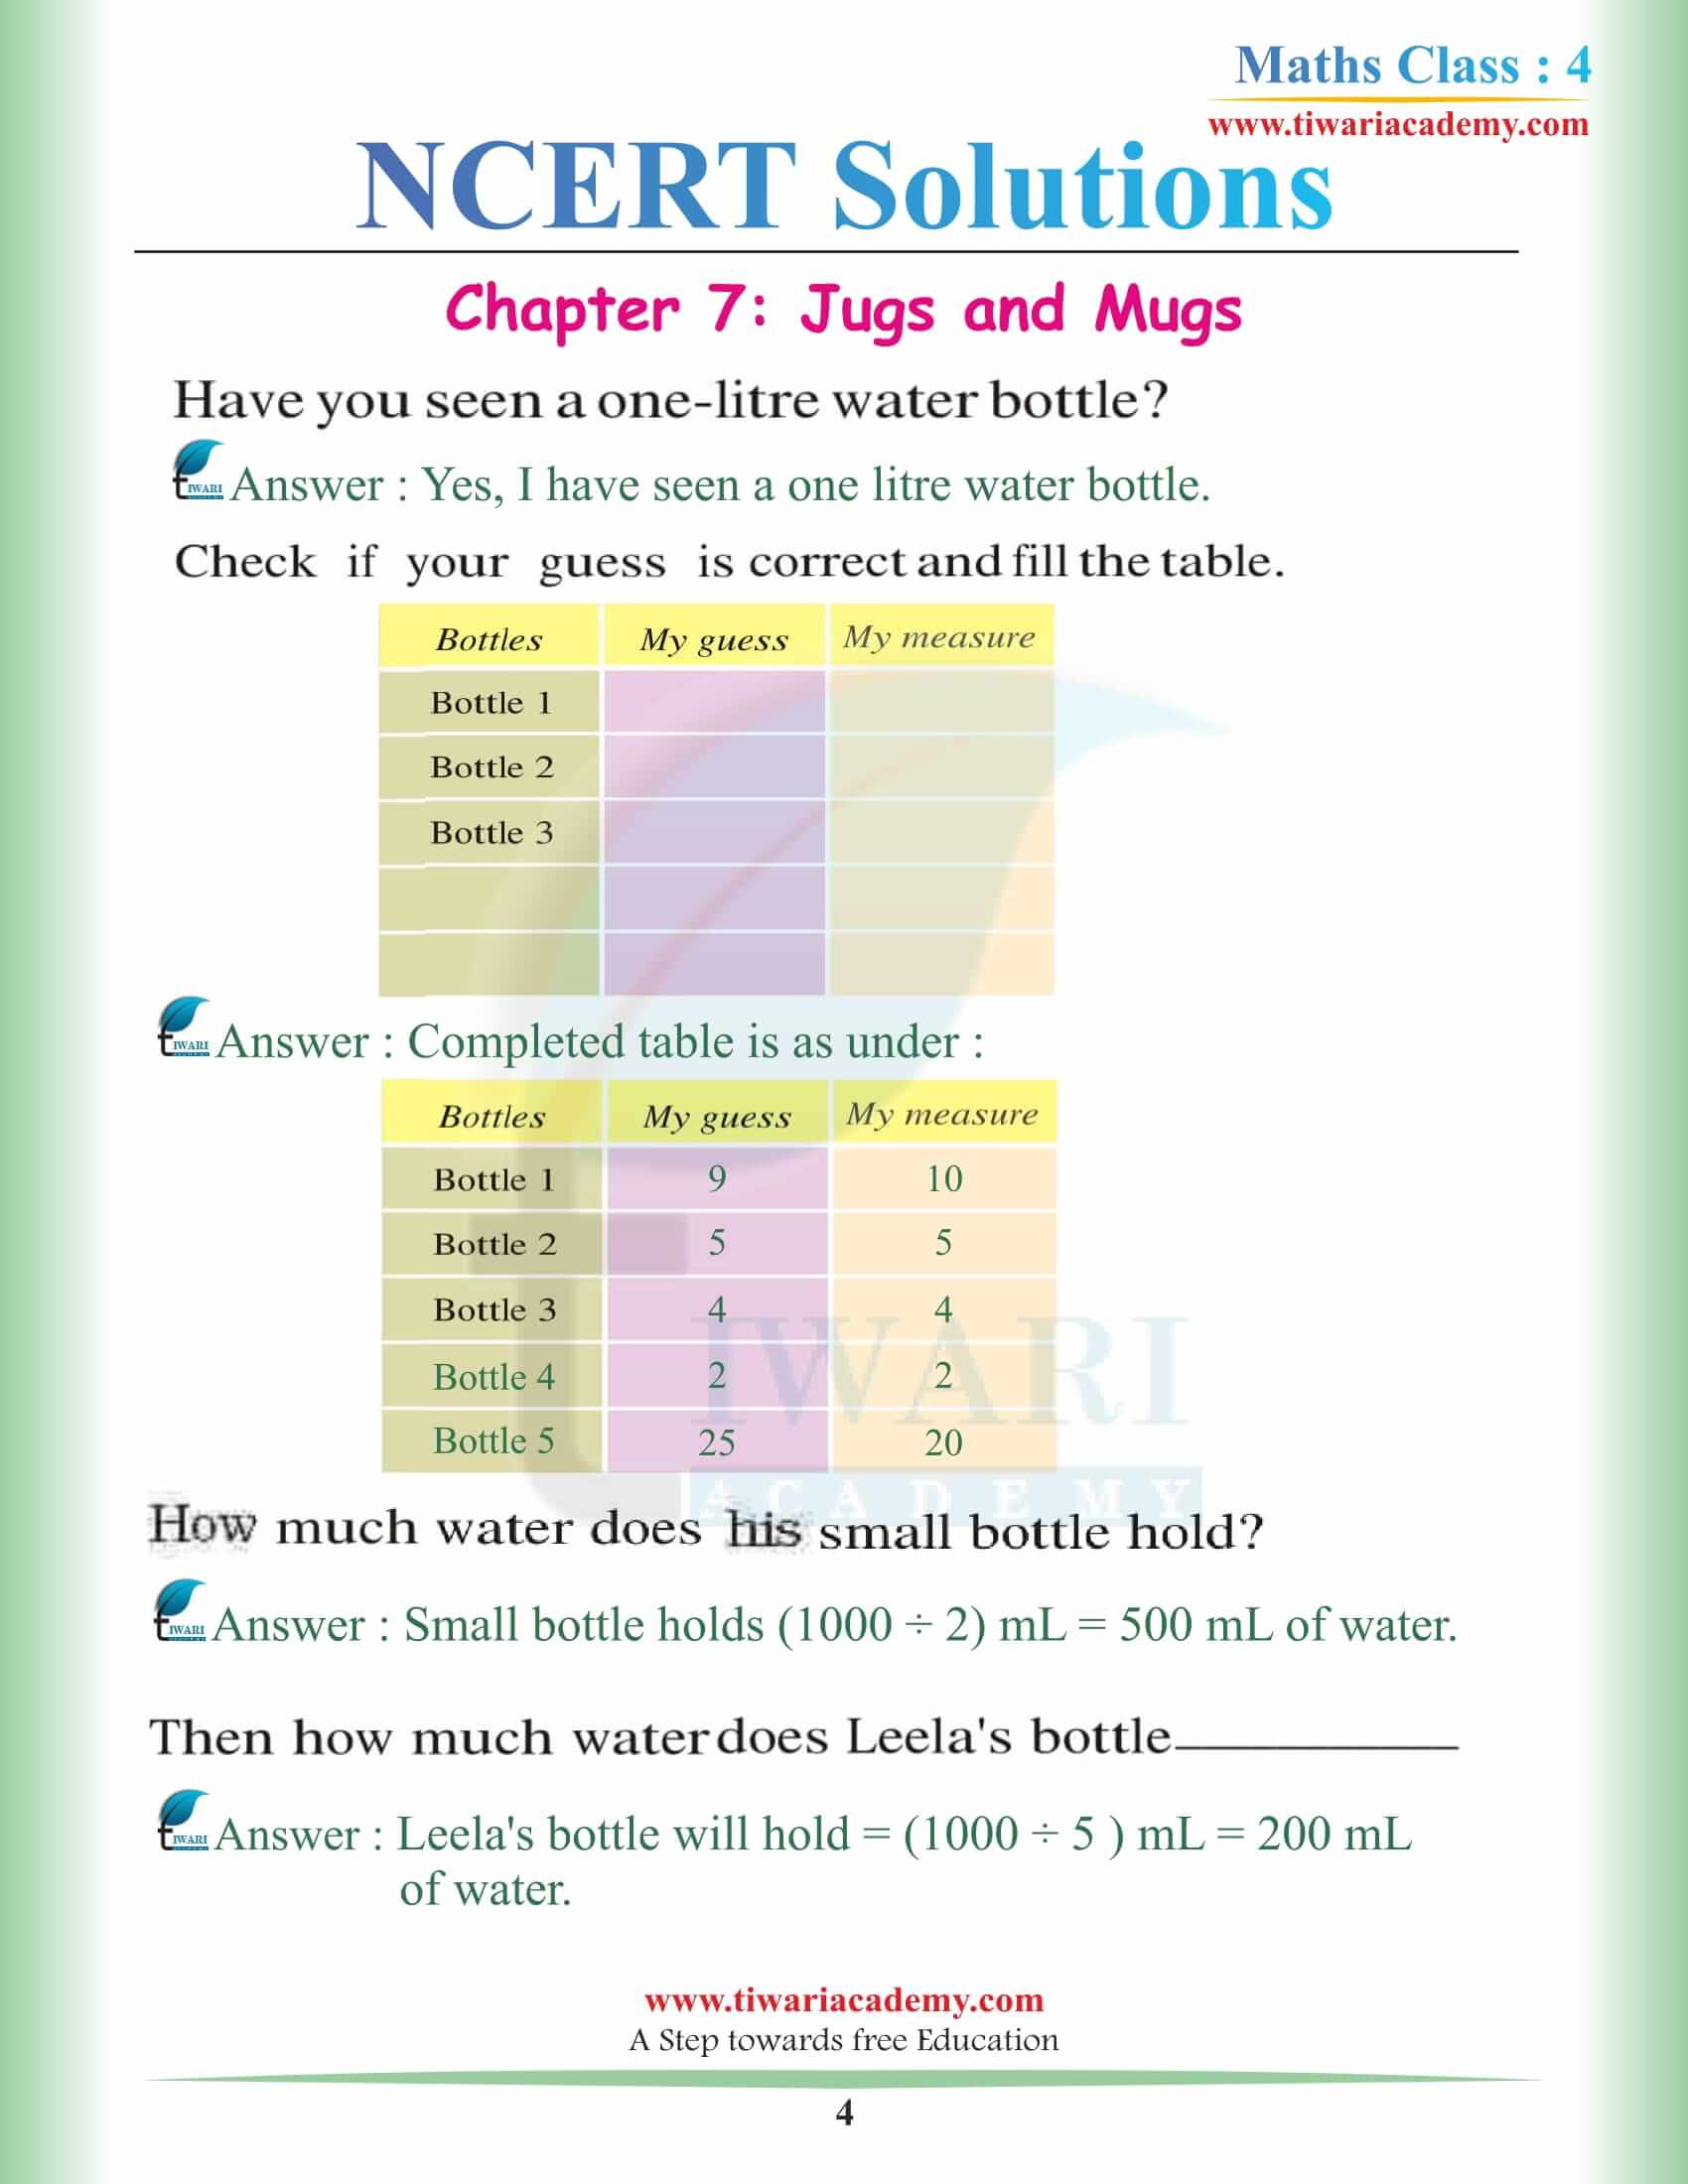 NCERT Solutions for Class 4 Maths Chapter 7 in English Medium